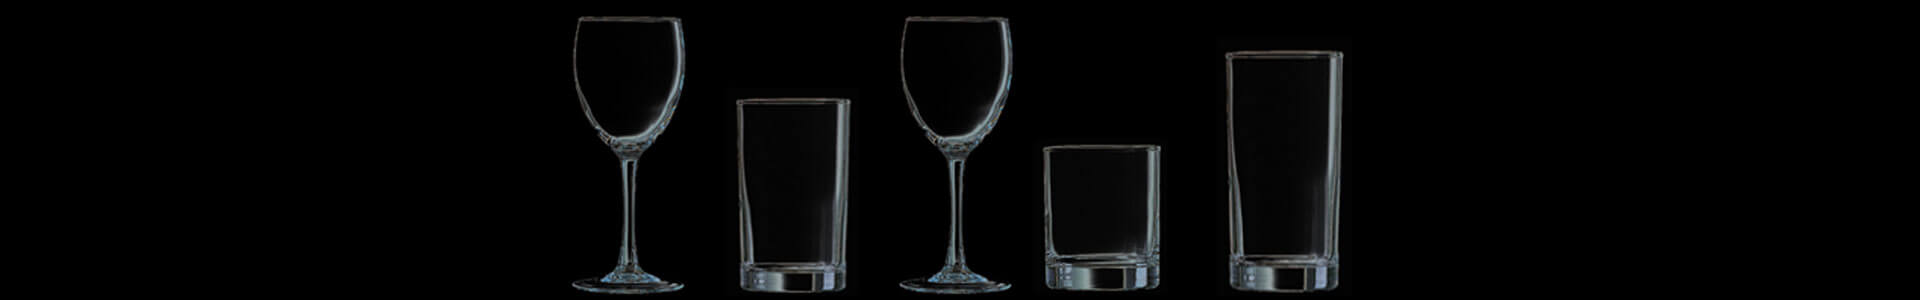 Glasses from the Arcoroc Princesa series as silhouettes.